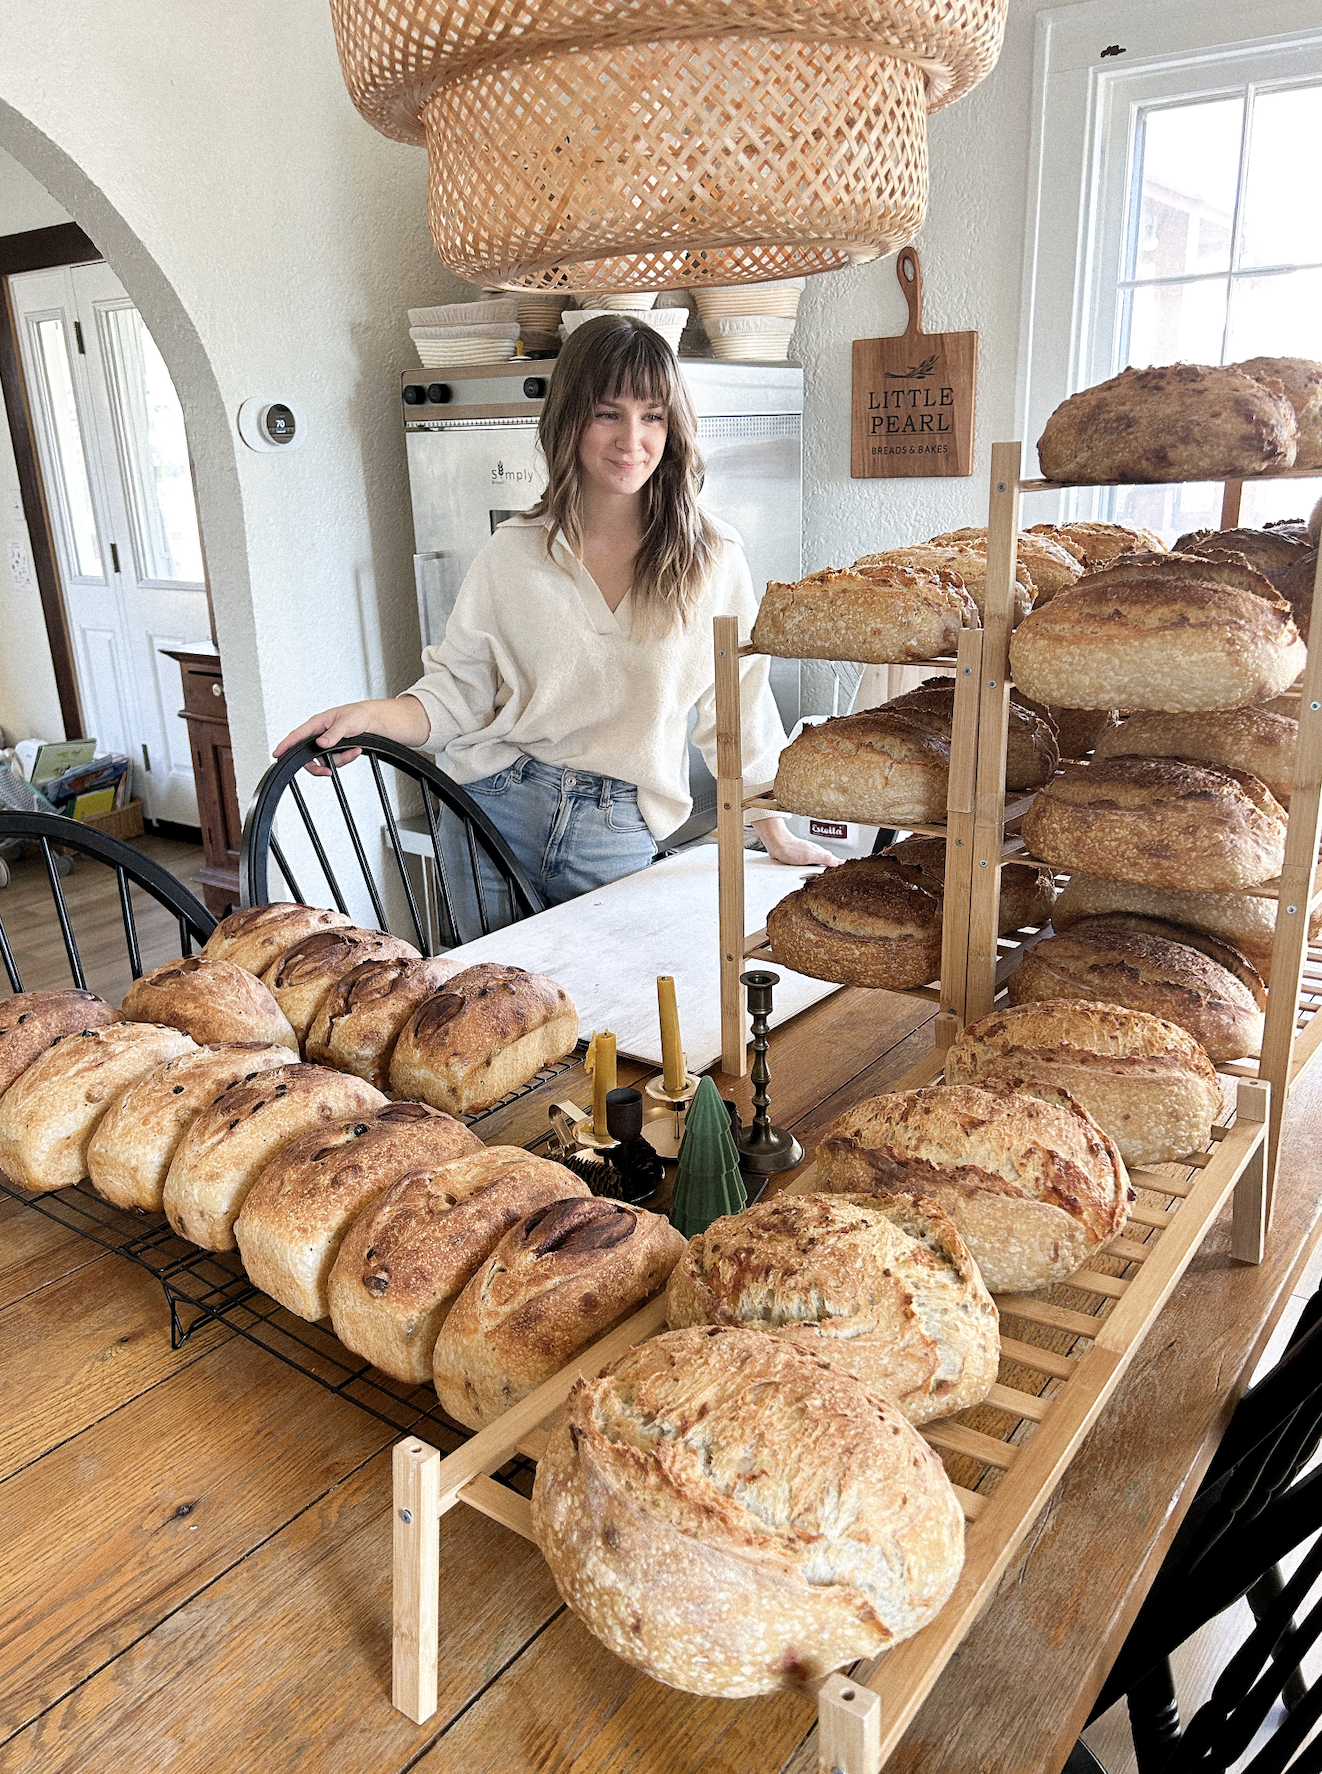 sourdough bread instagram influencer aurora illinois united states sourdough bread for sale local loaves of bread from @littlepearlbreads 63209